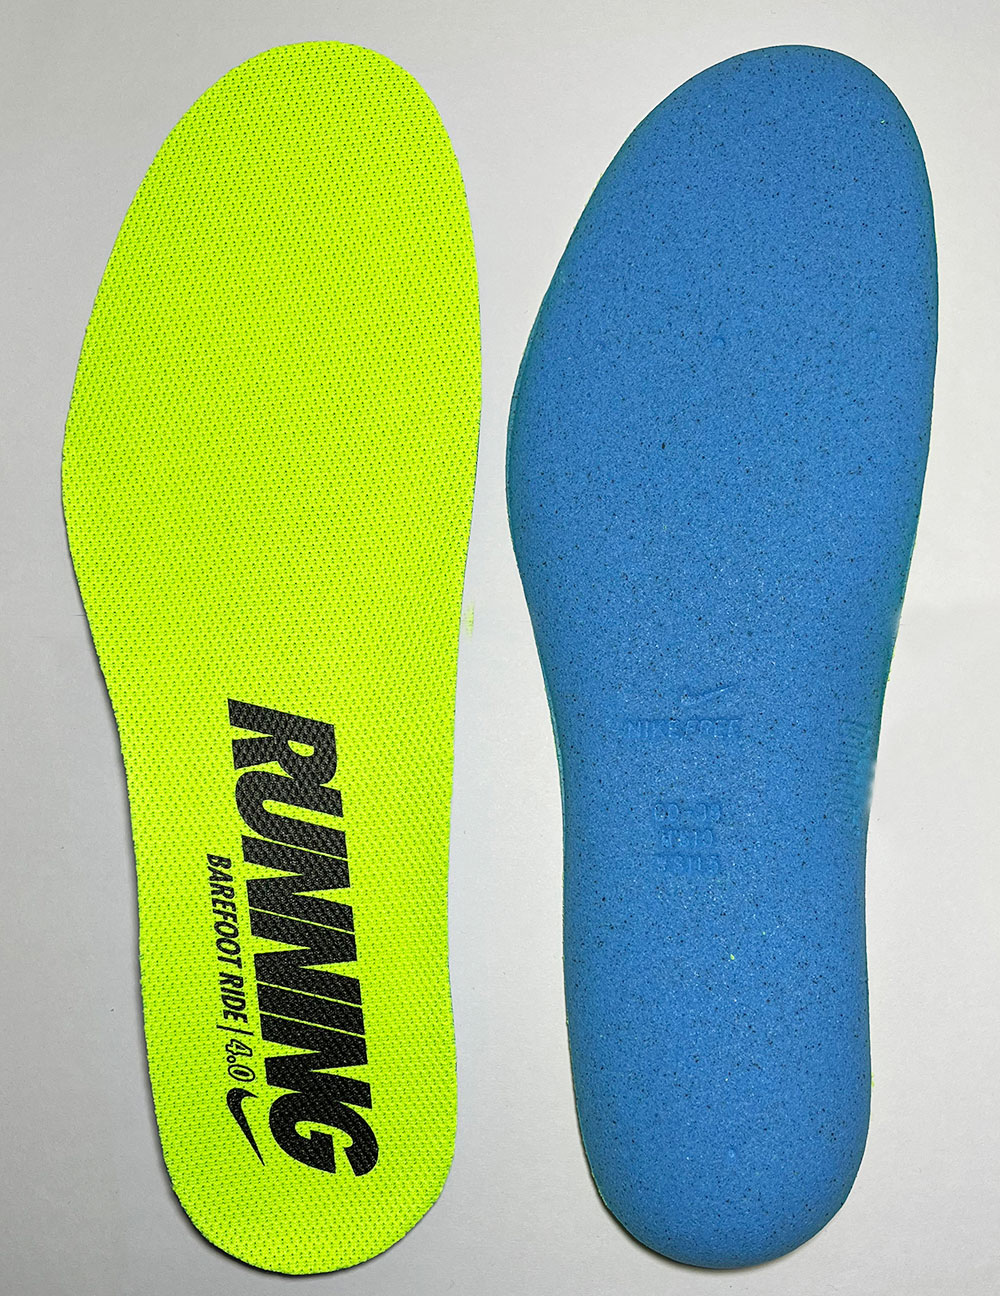 nike free 5.0 insoles